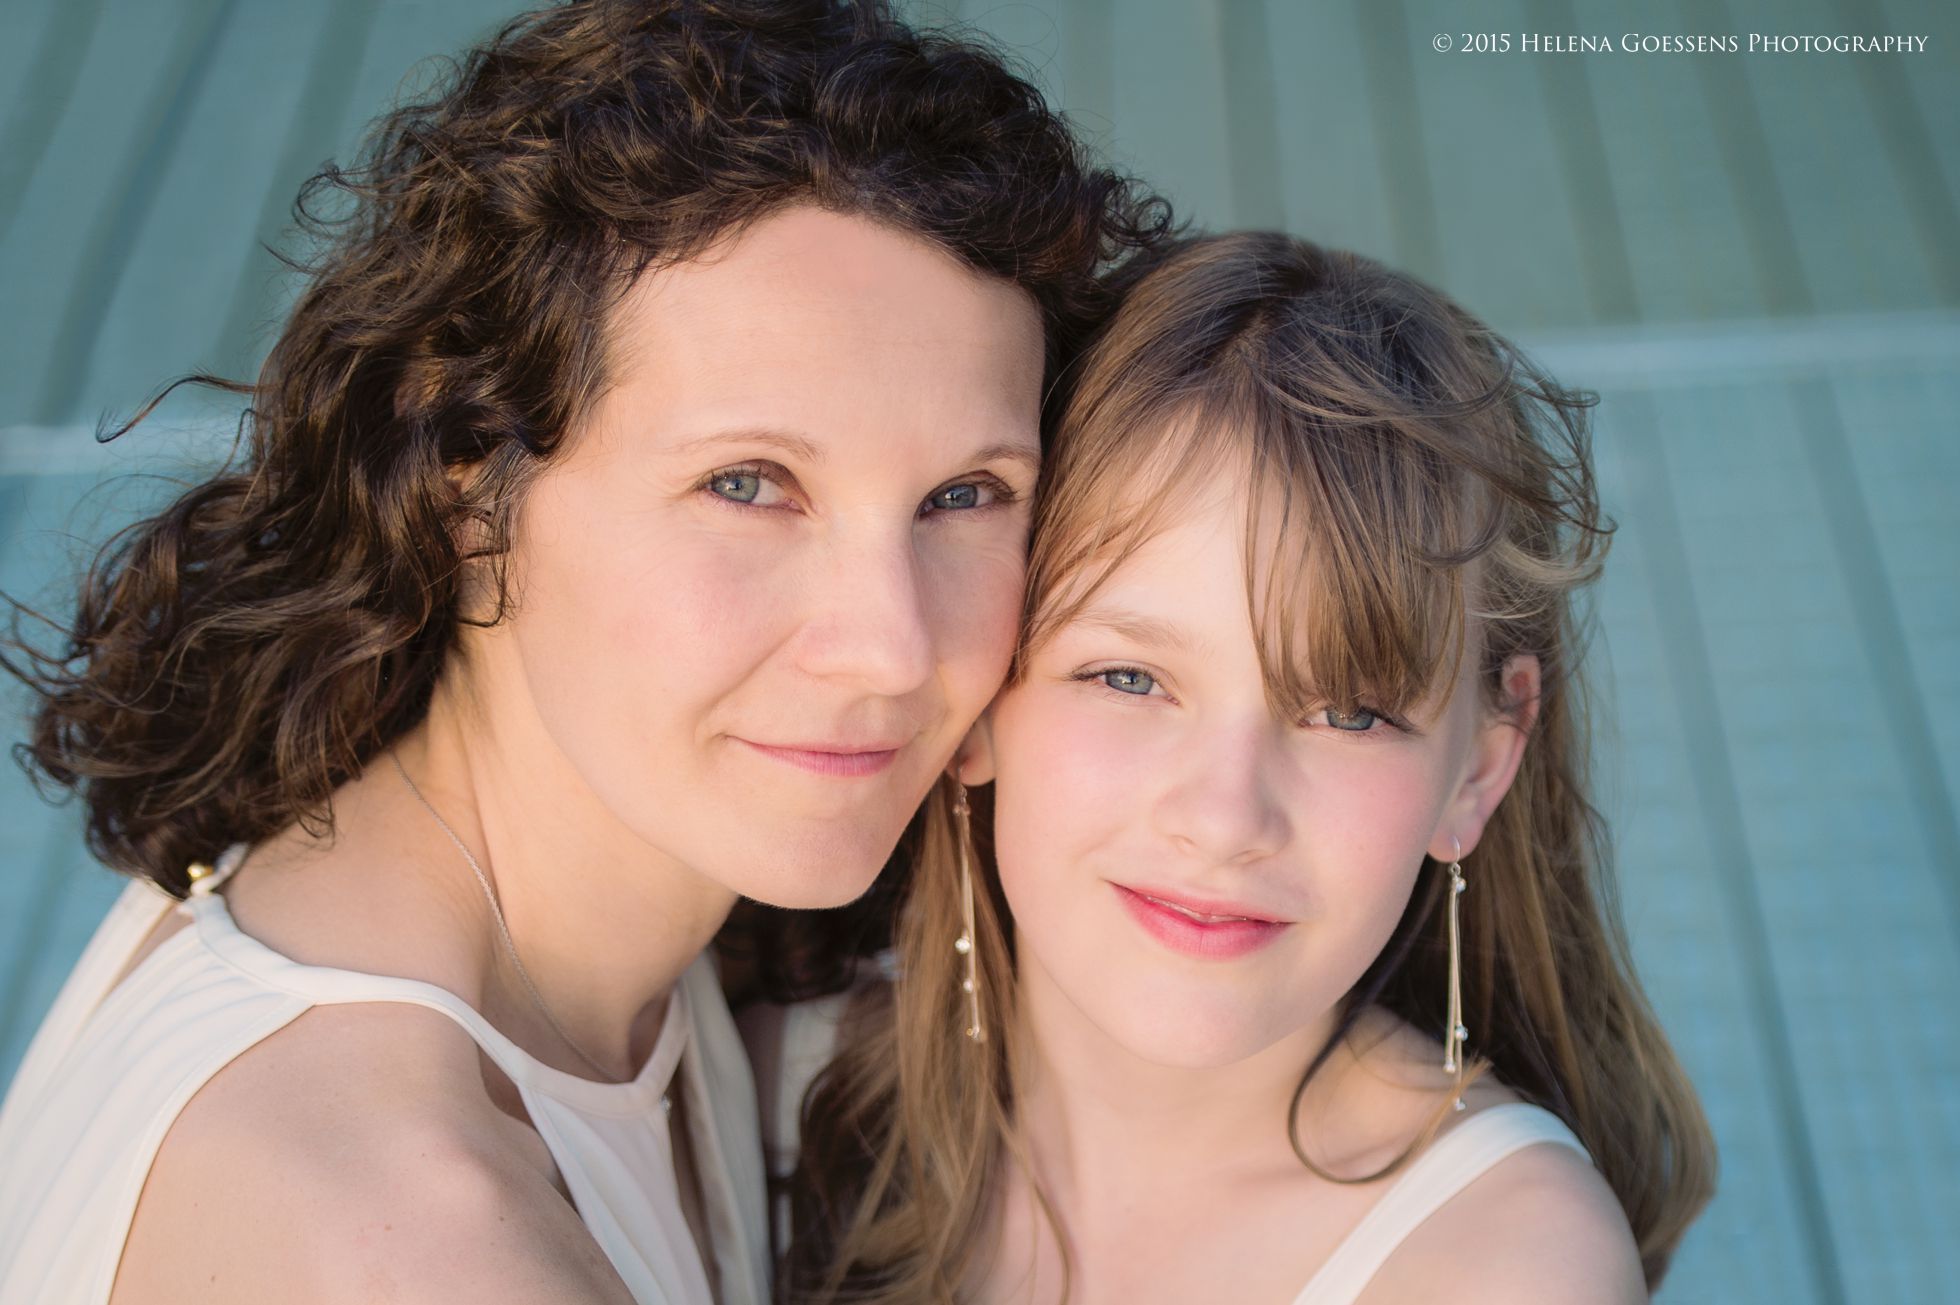 Mother-Daughter photo session toghether portrait